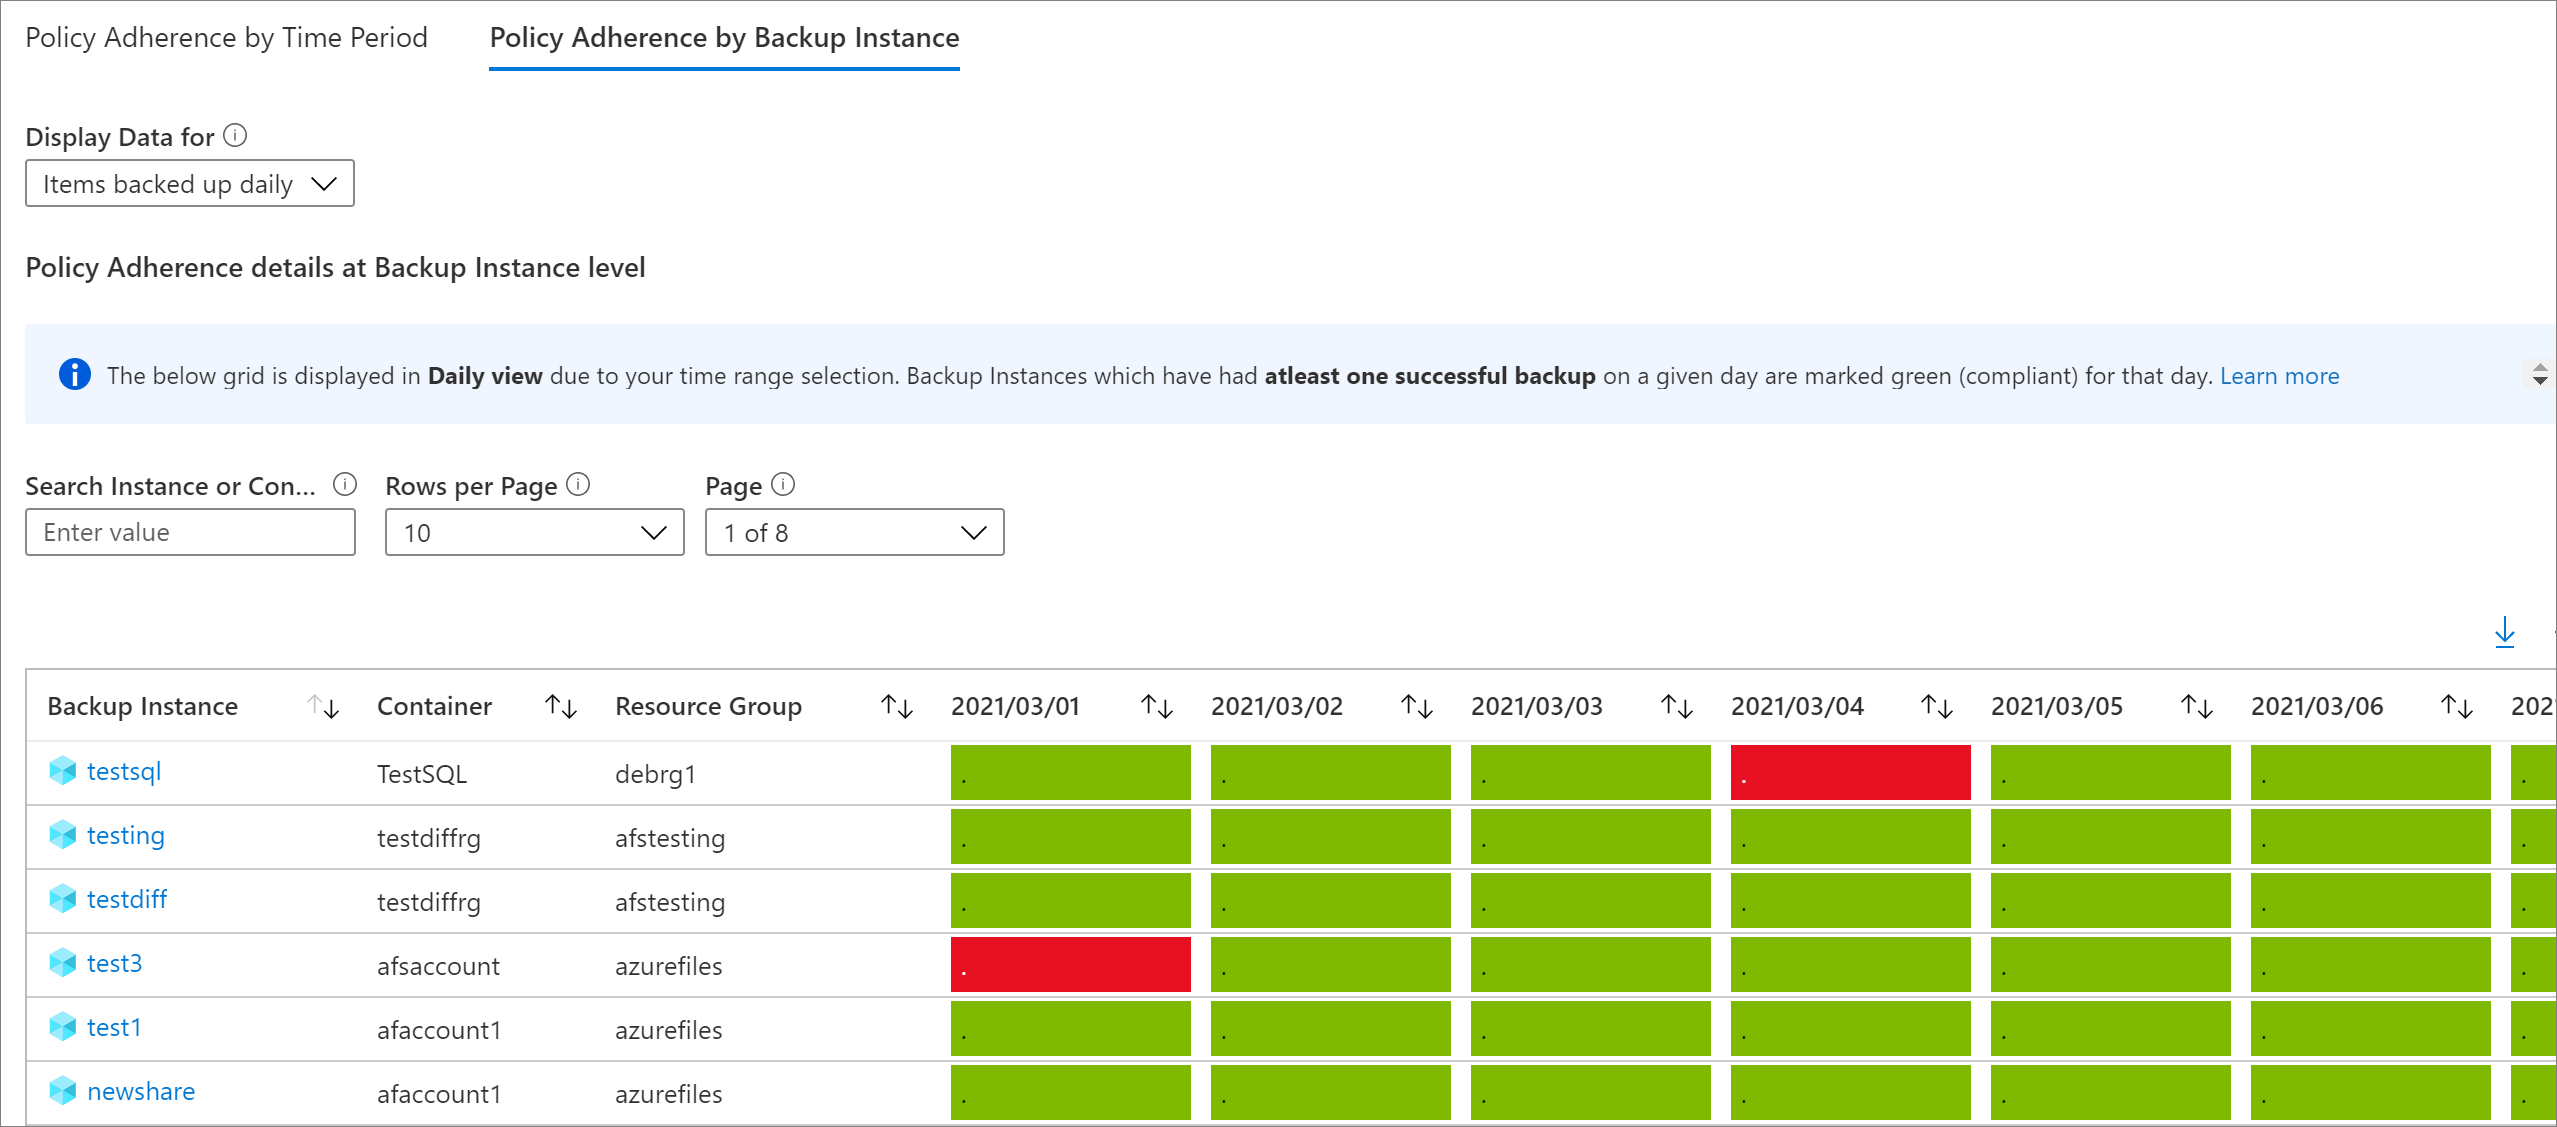 Policy Adherence By Backup Instance